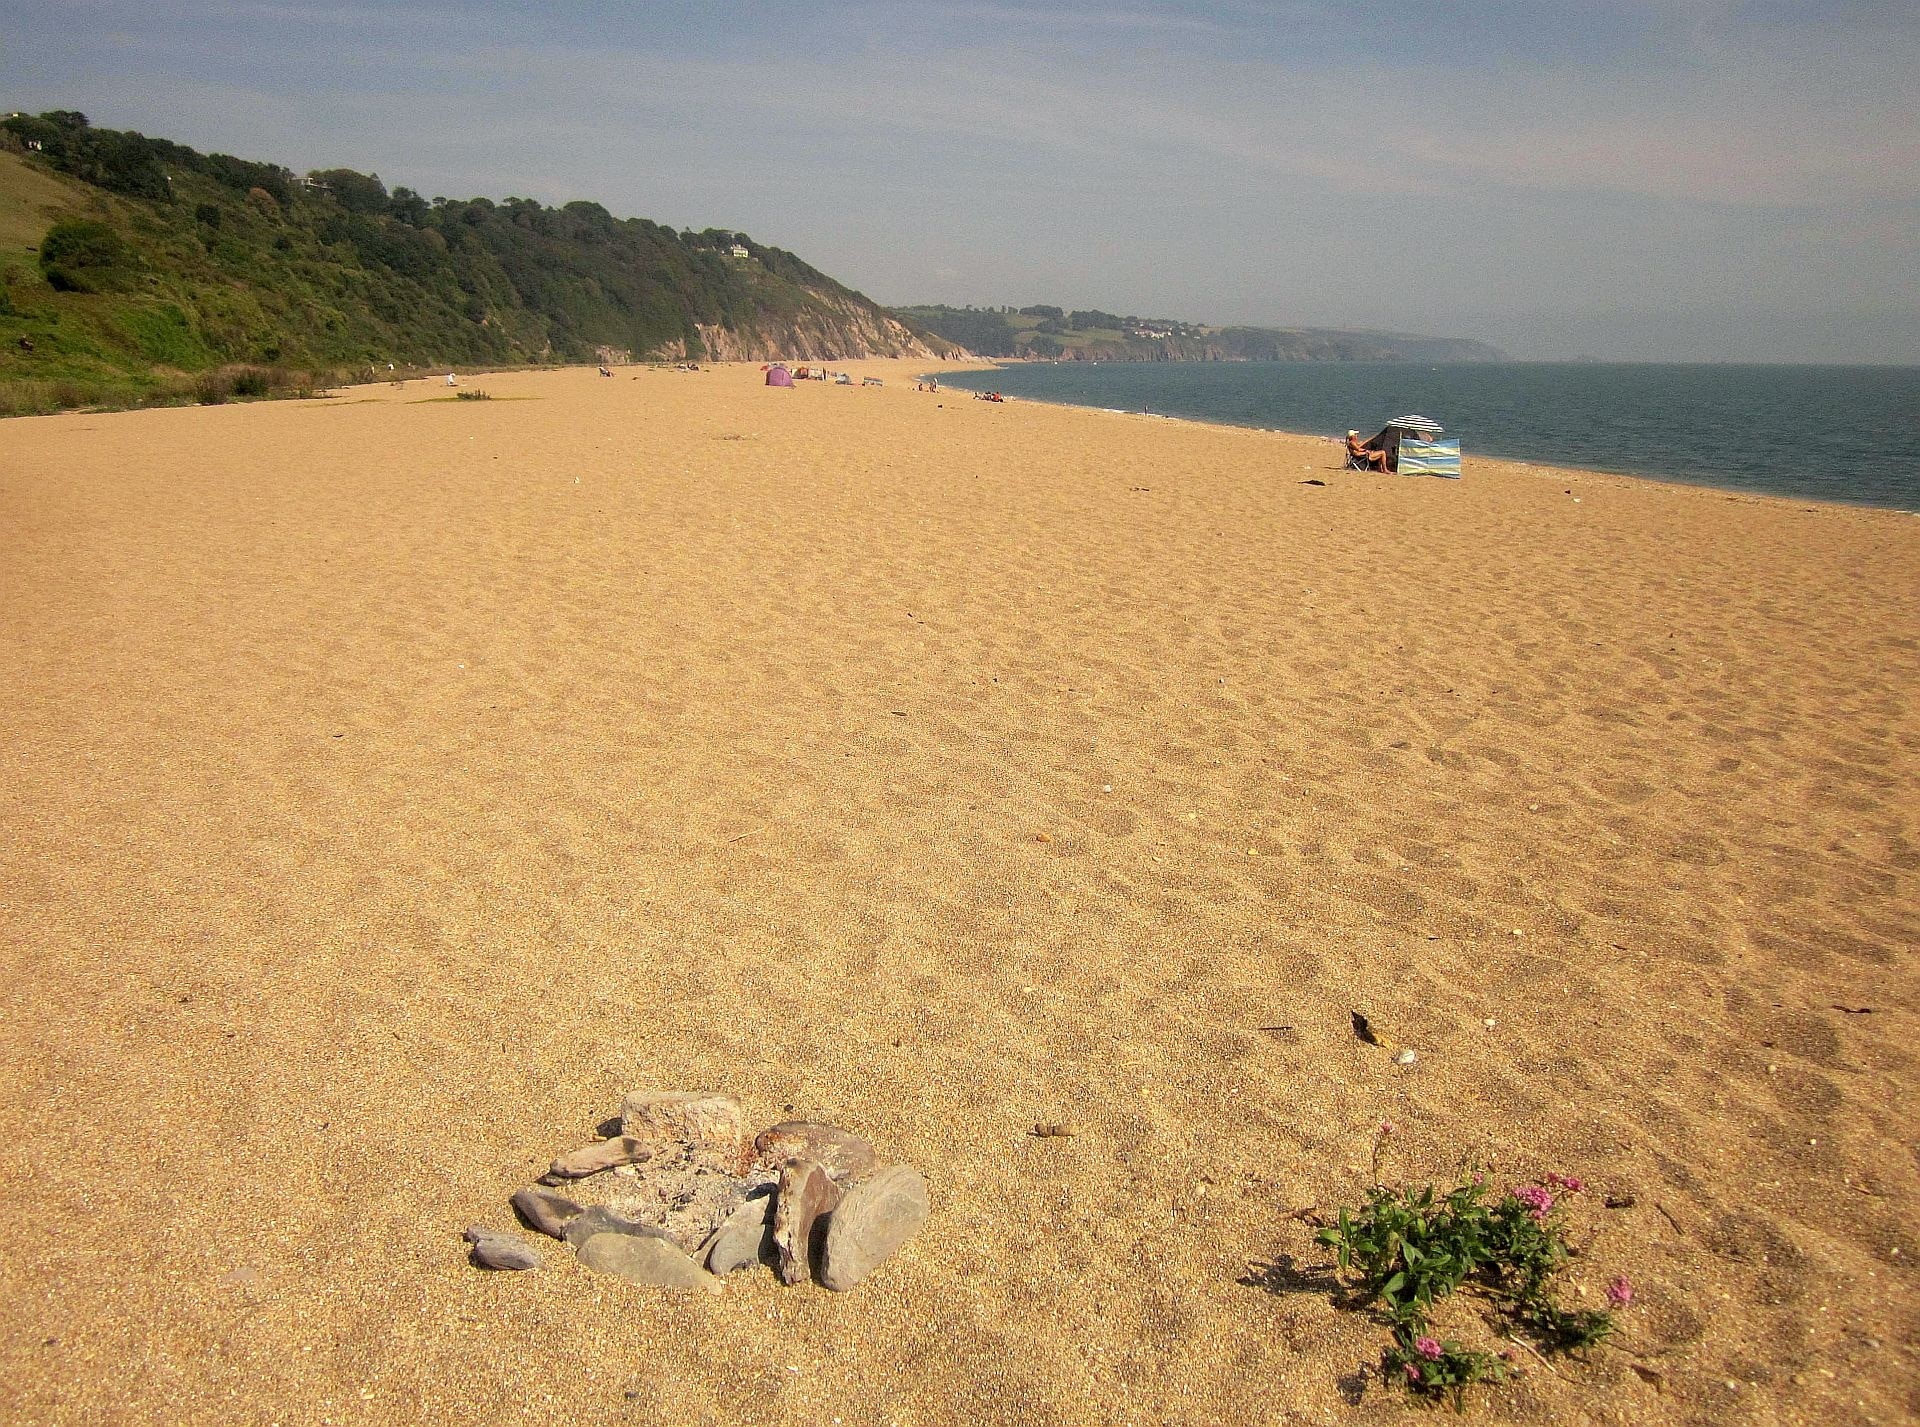 Slapton Sands. A little reminiscent of a Fellini beach scene. This is the northern end of the "sands", taken close to Strete Gate.